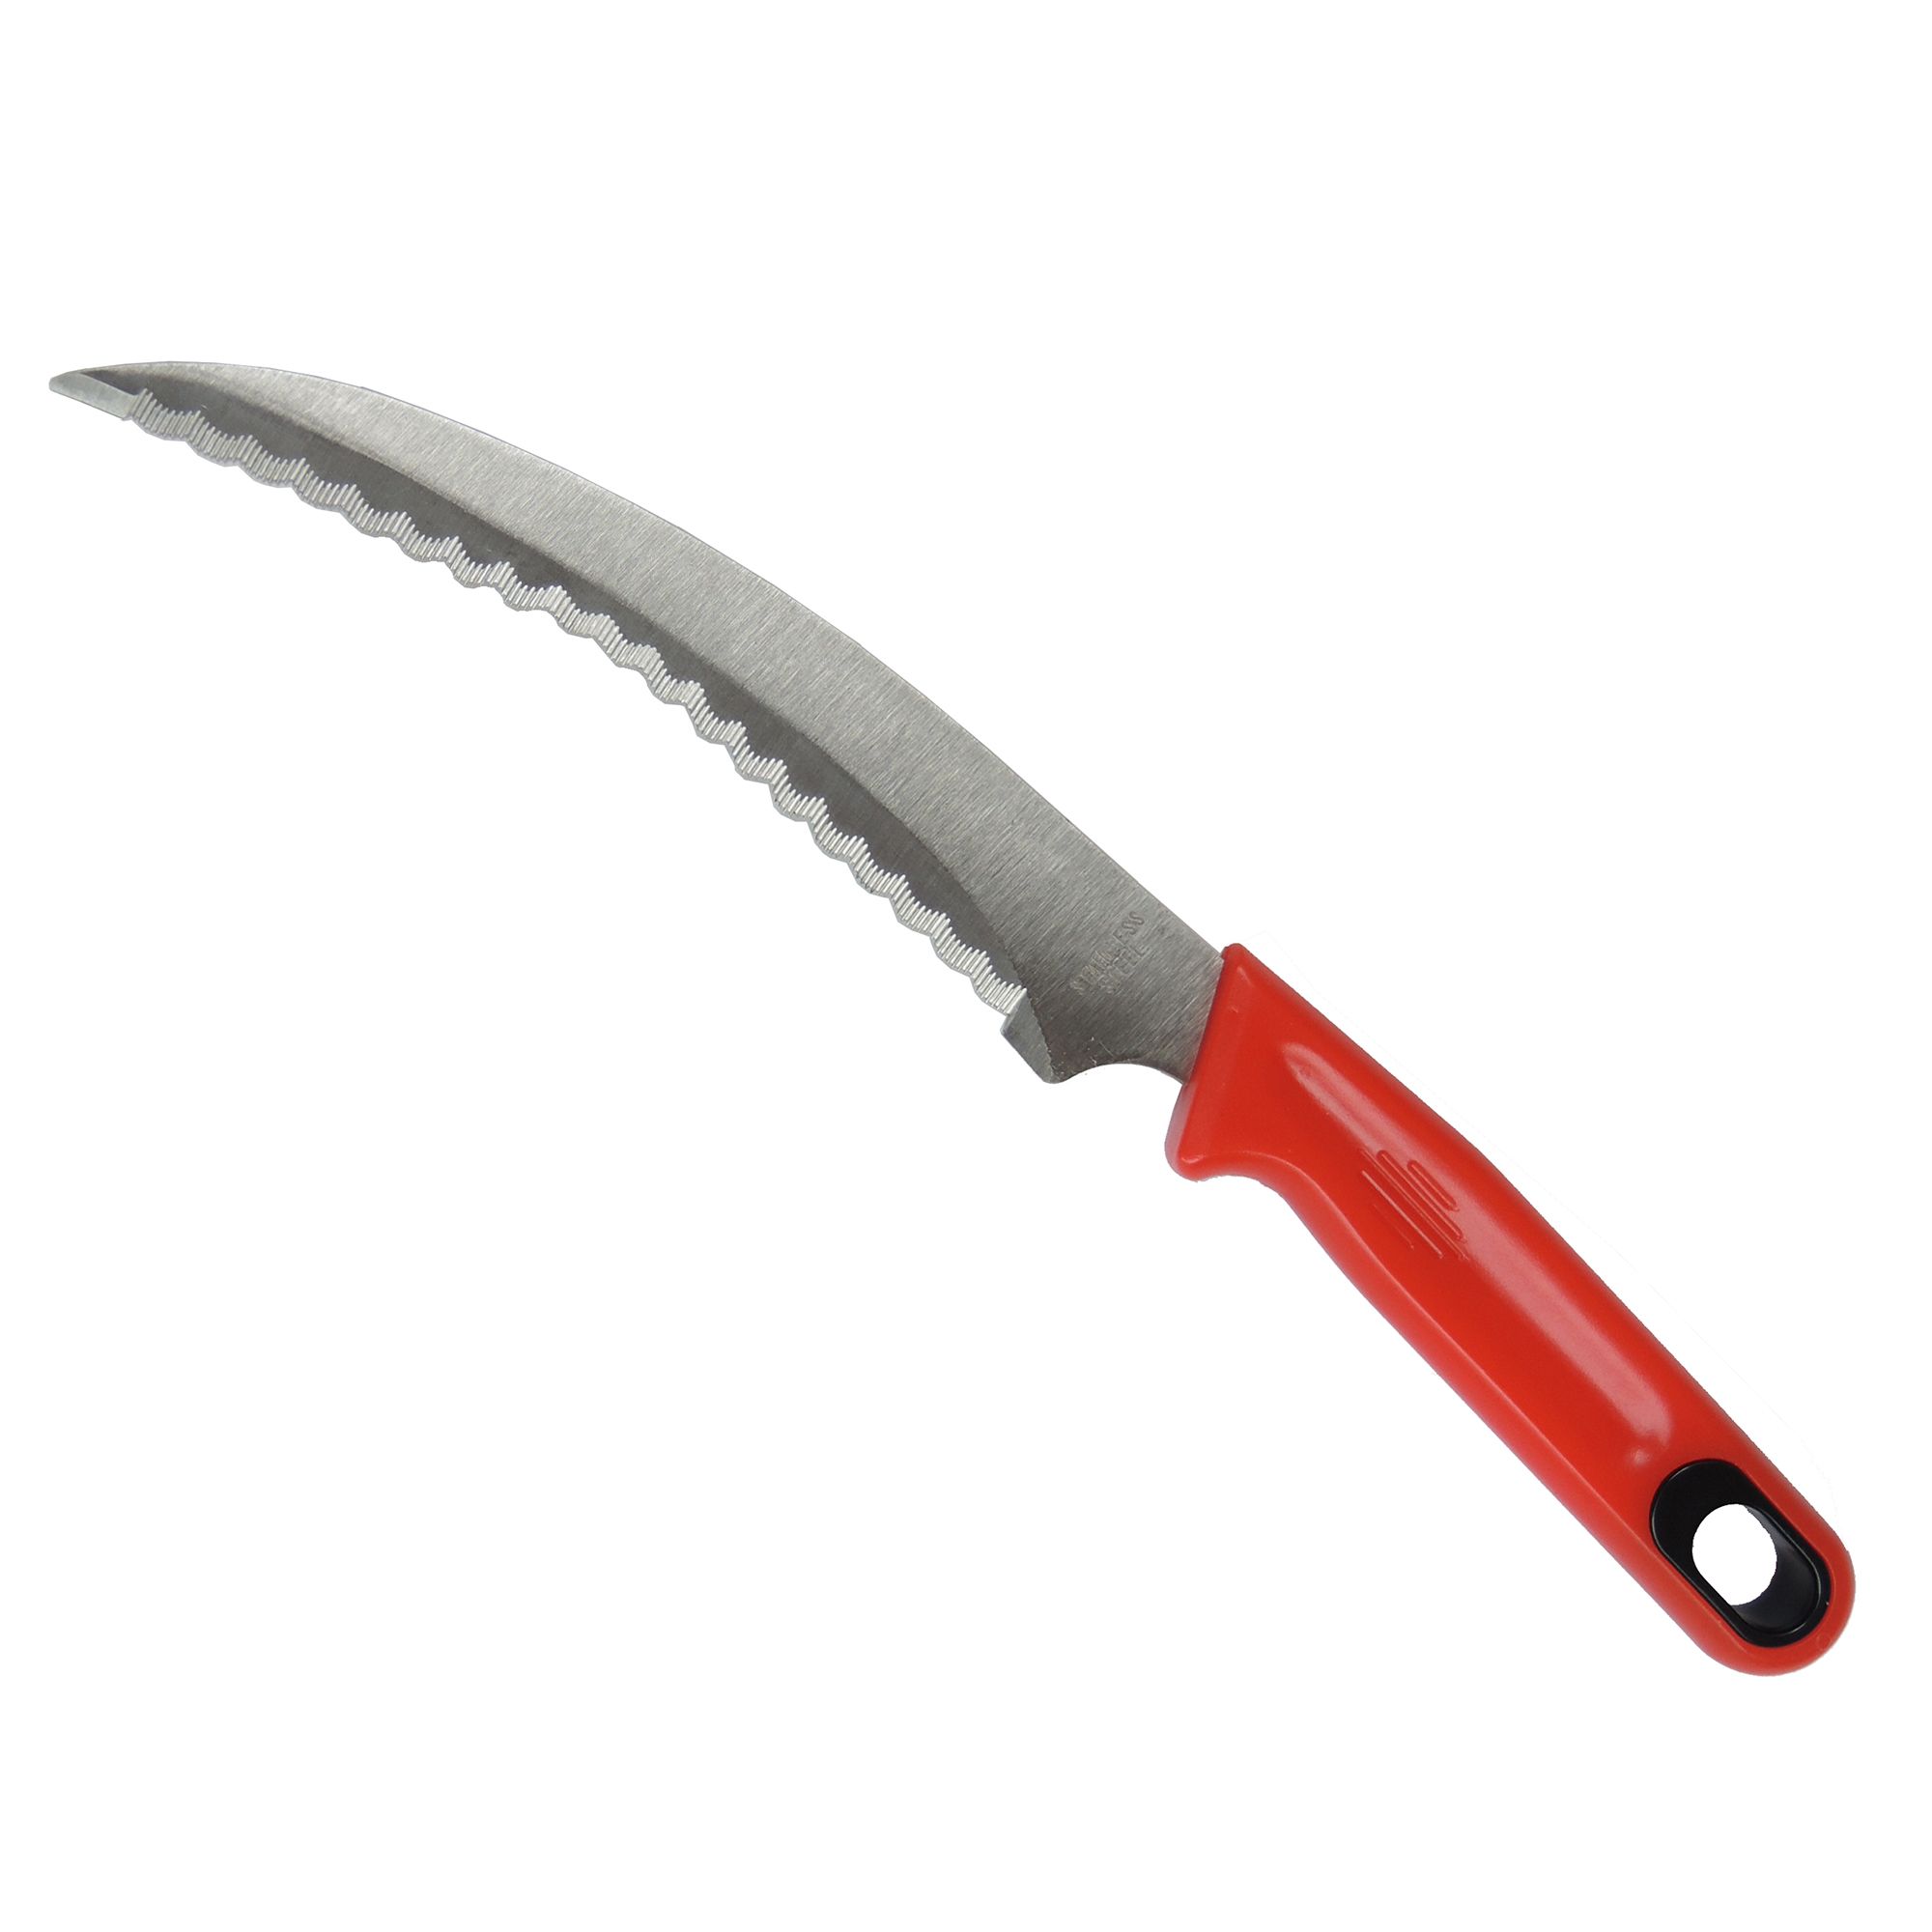 10inch (250mm) Serrated Blade Garden Knife, Japanese Saws & Hacksaws  Cutting Tools Manufacturer